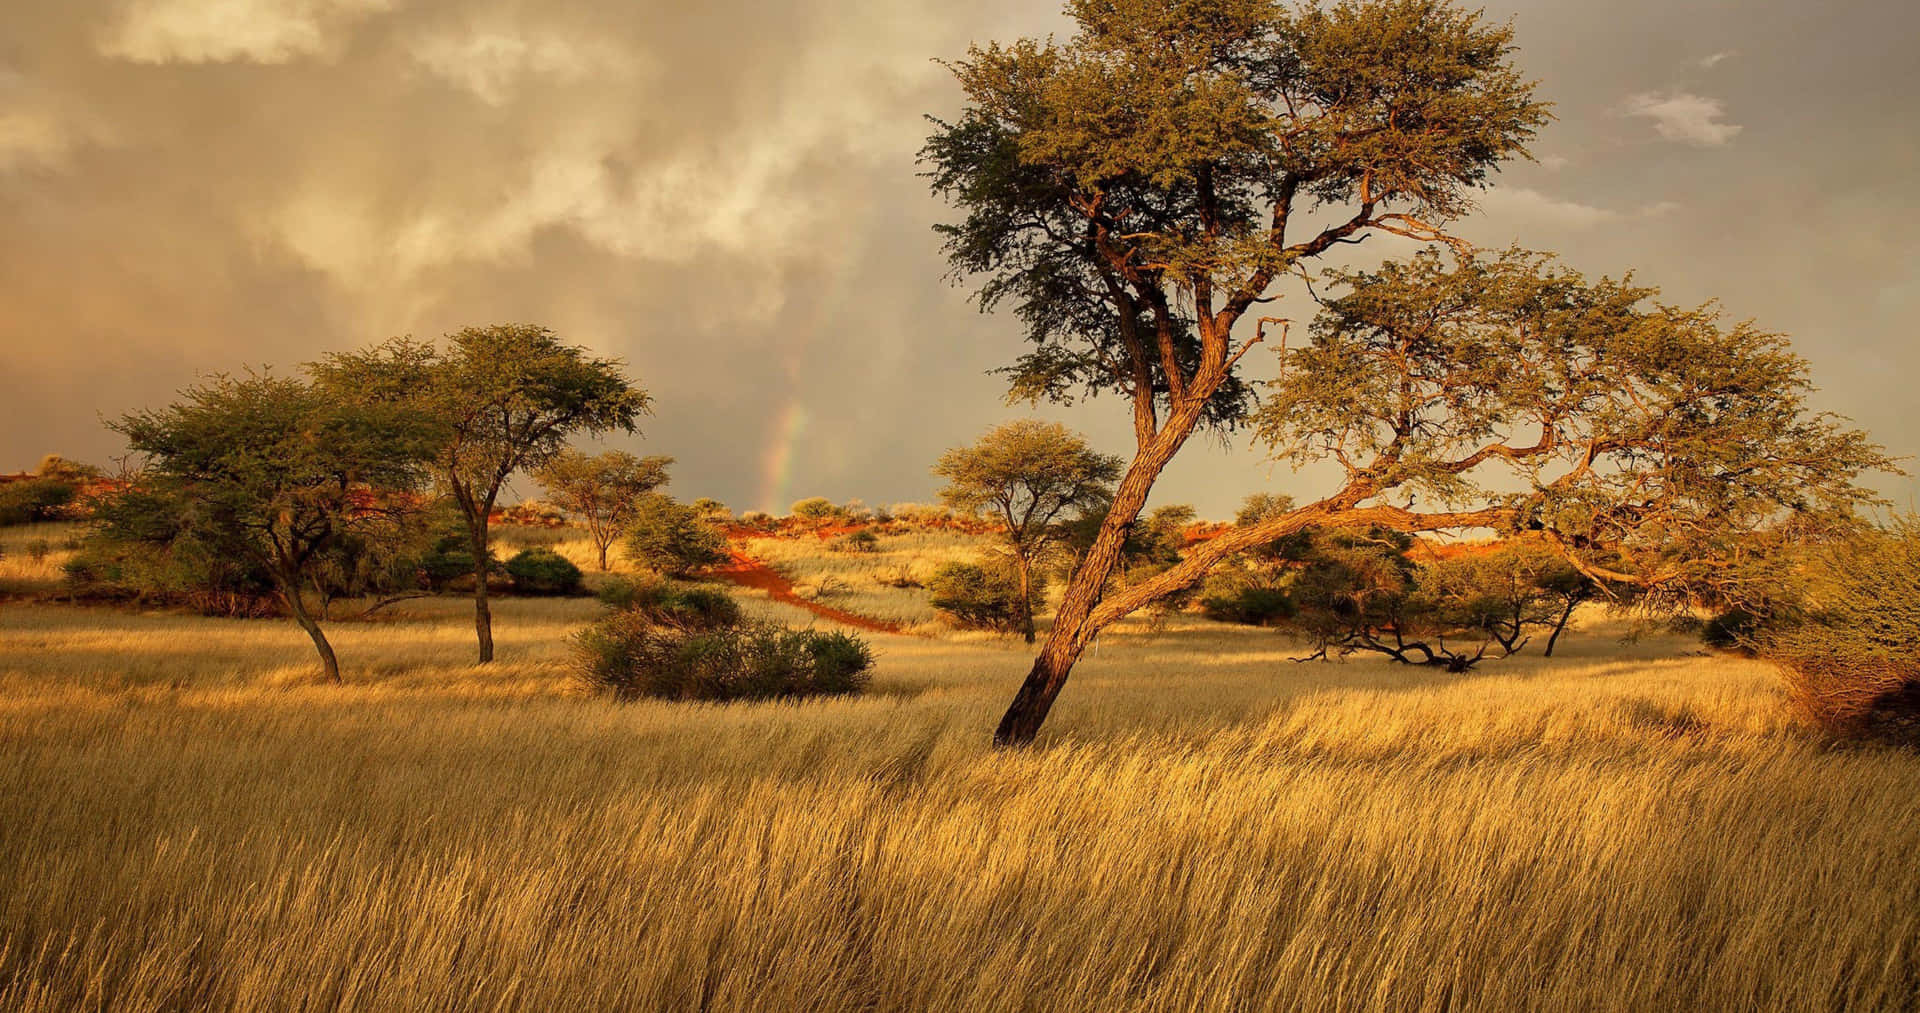 The Beauty and Mystery of Africa